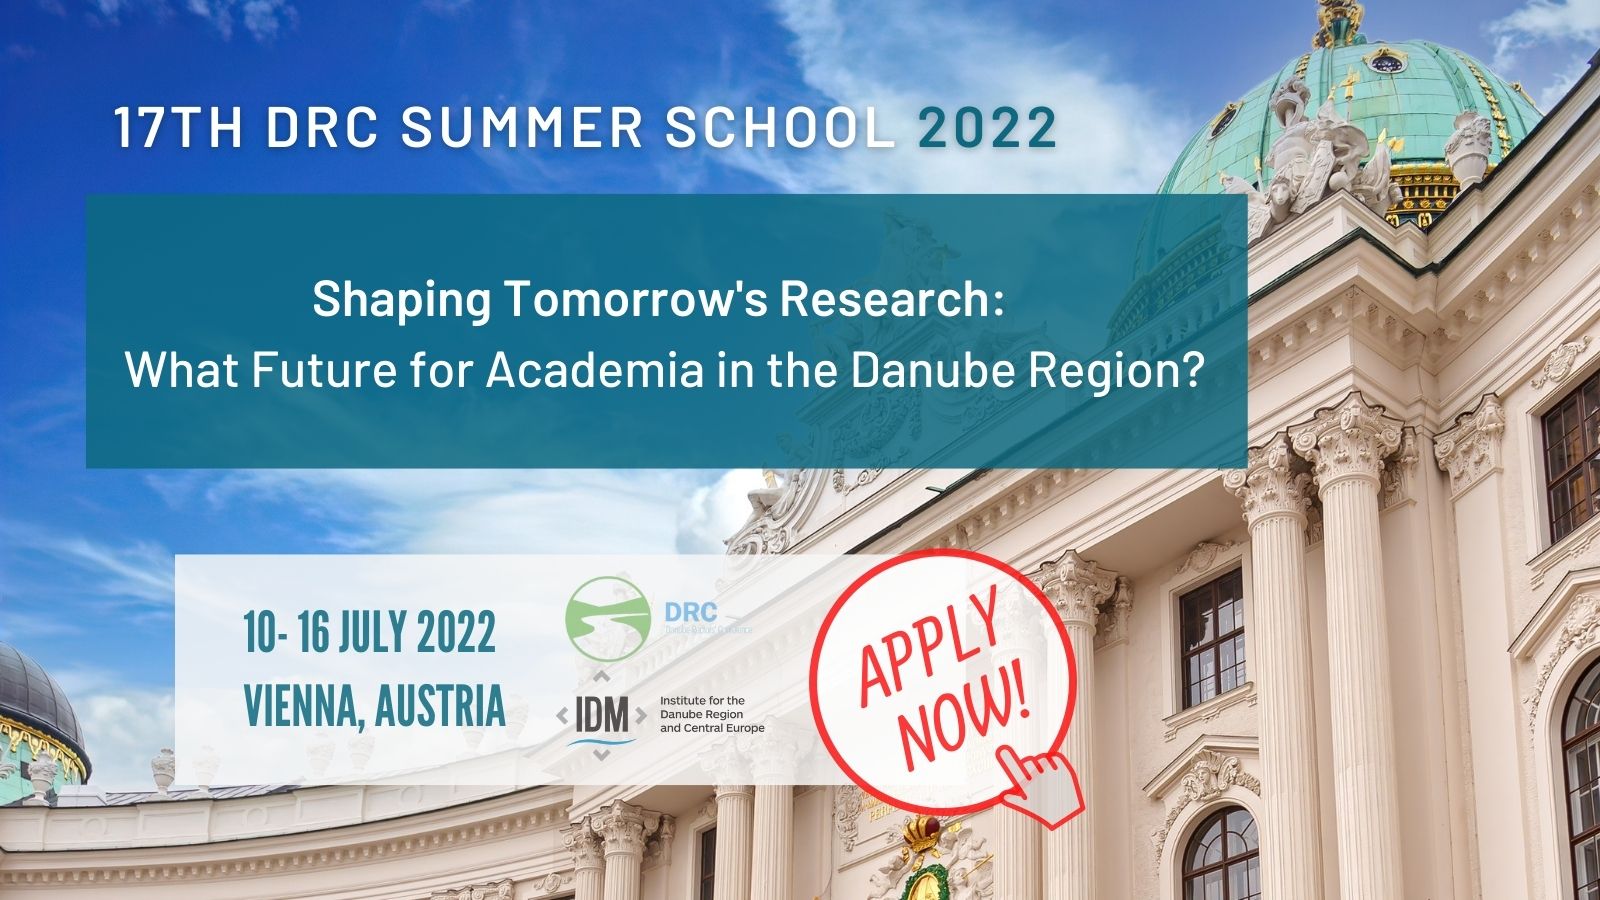 17th DRC Summer School "Shaping Tomorrow's Research: What Future for Academia in the Danube Region?"